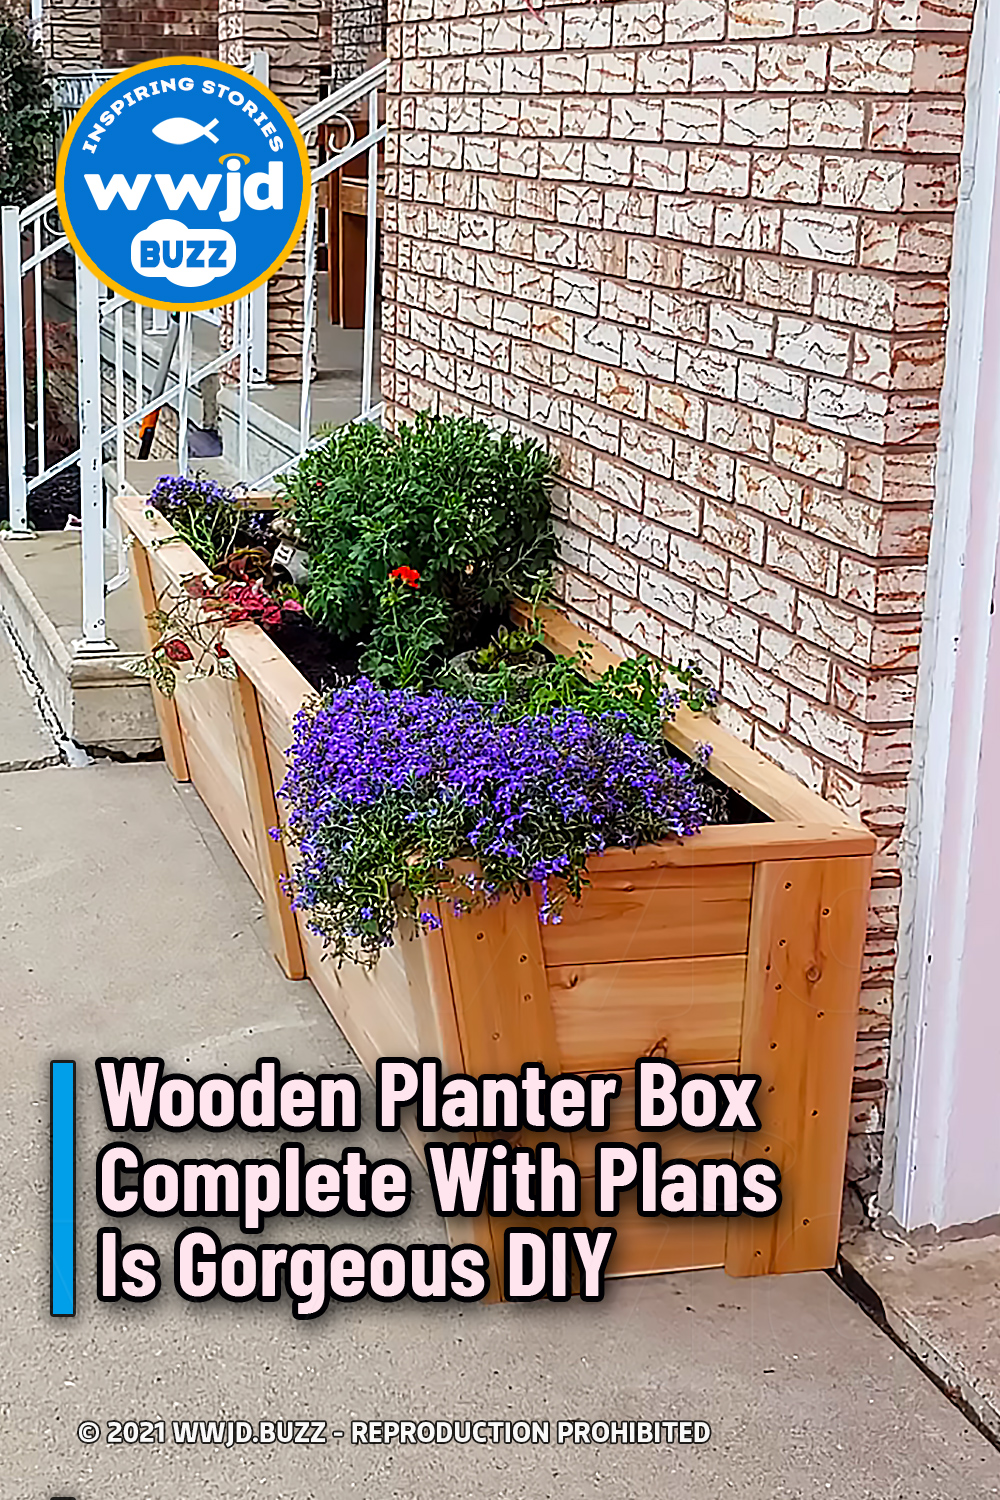 Wooden Planter Box Complete With Plans Is Gorgeous DIY